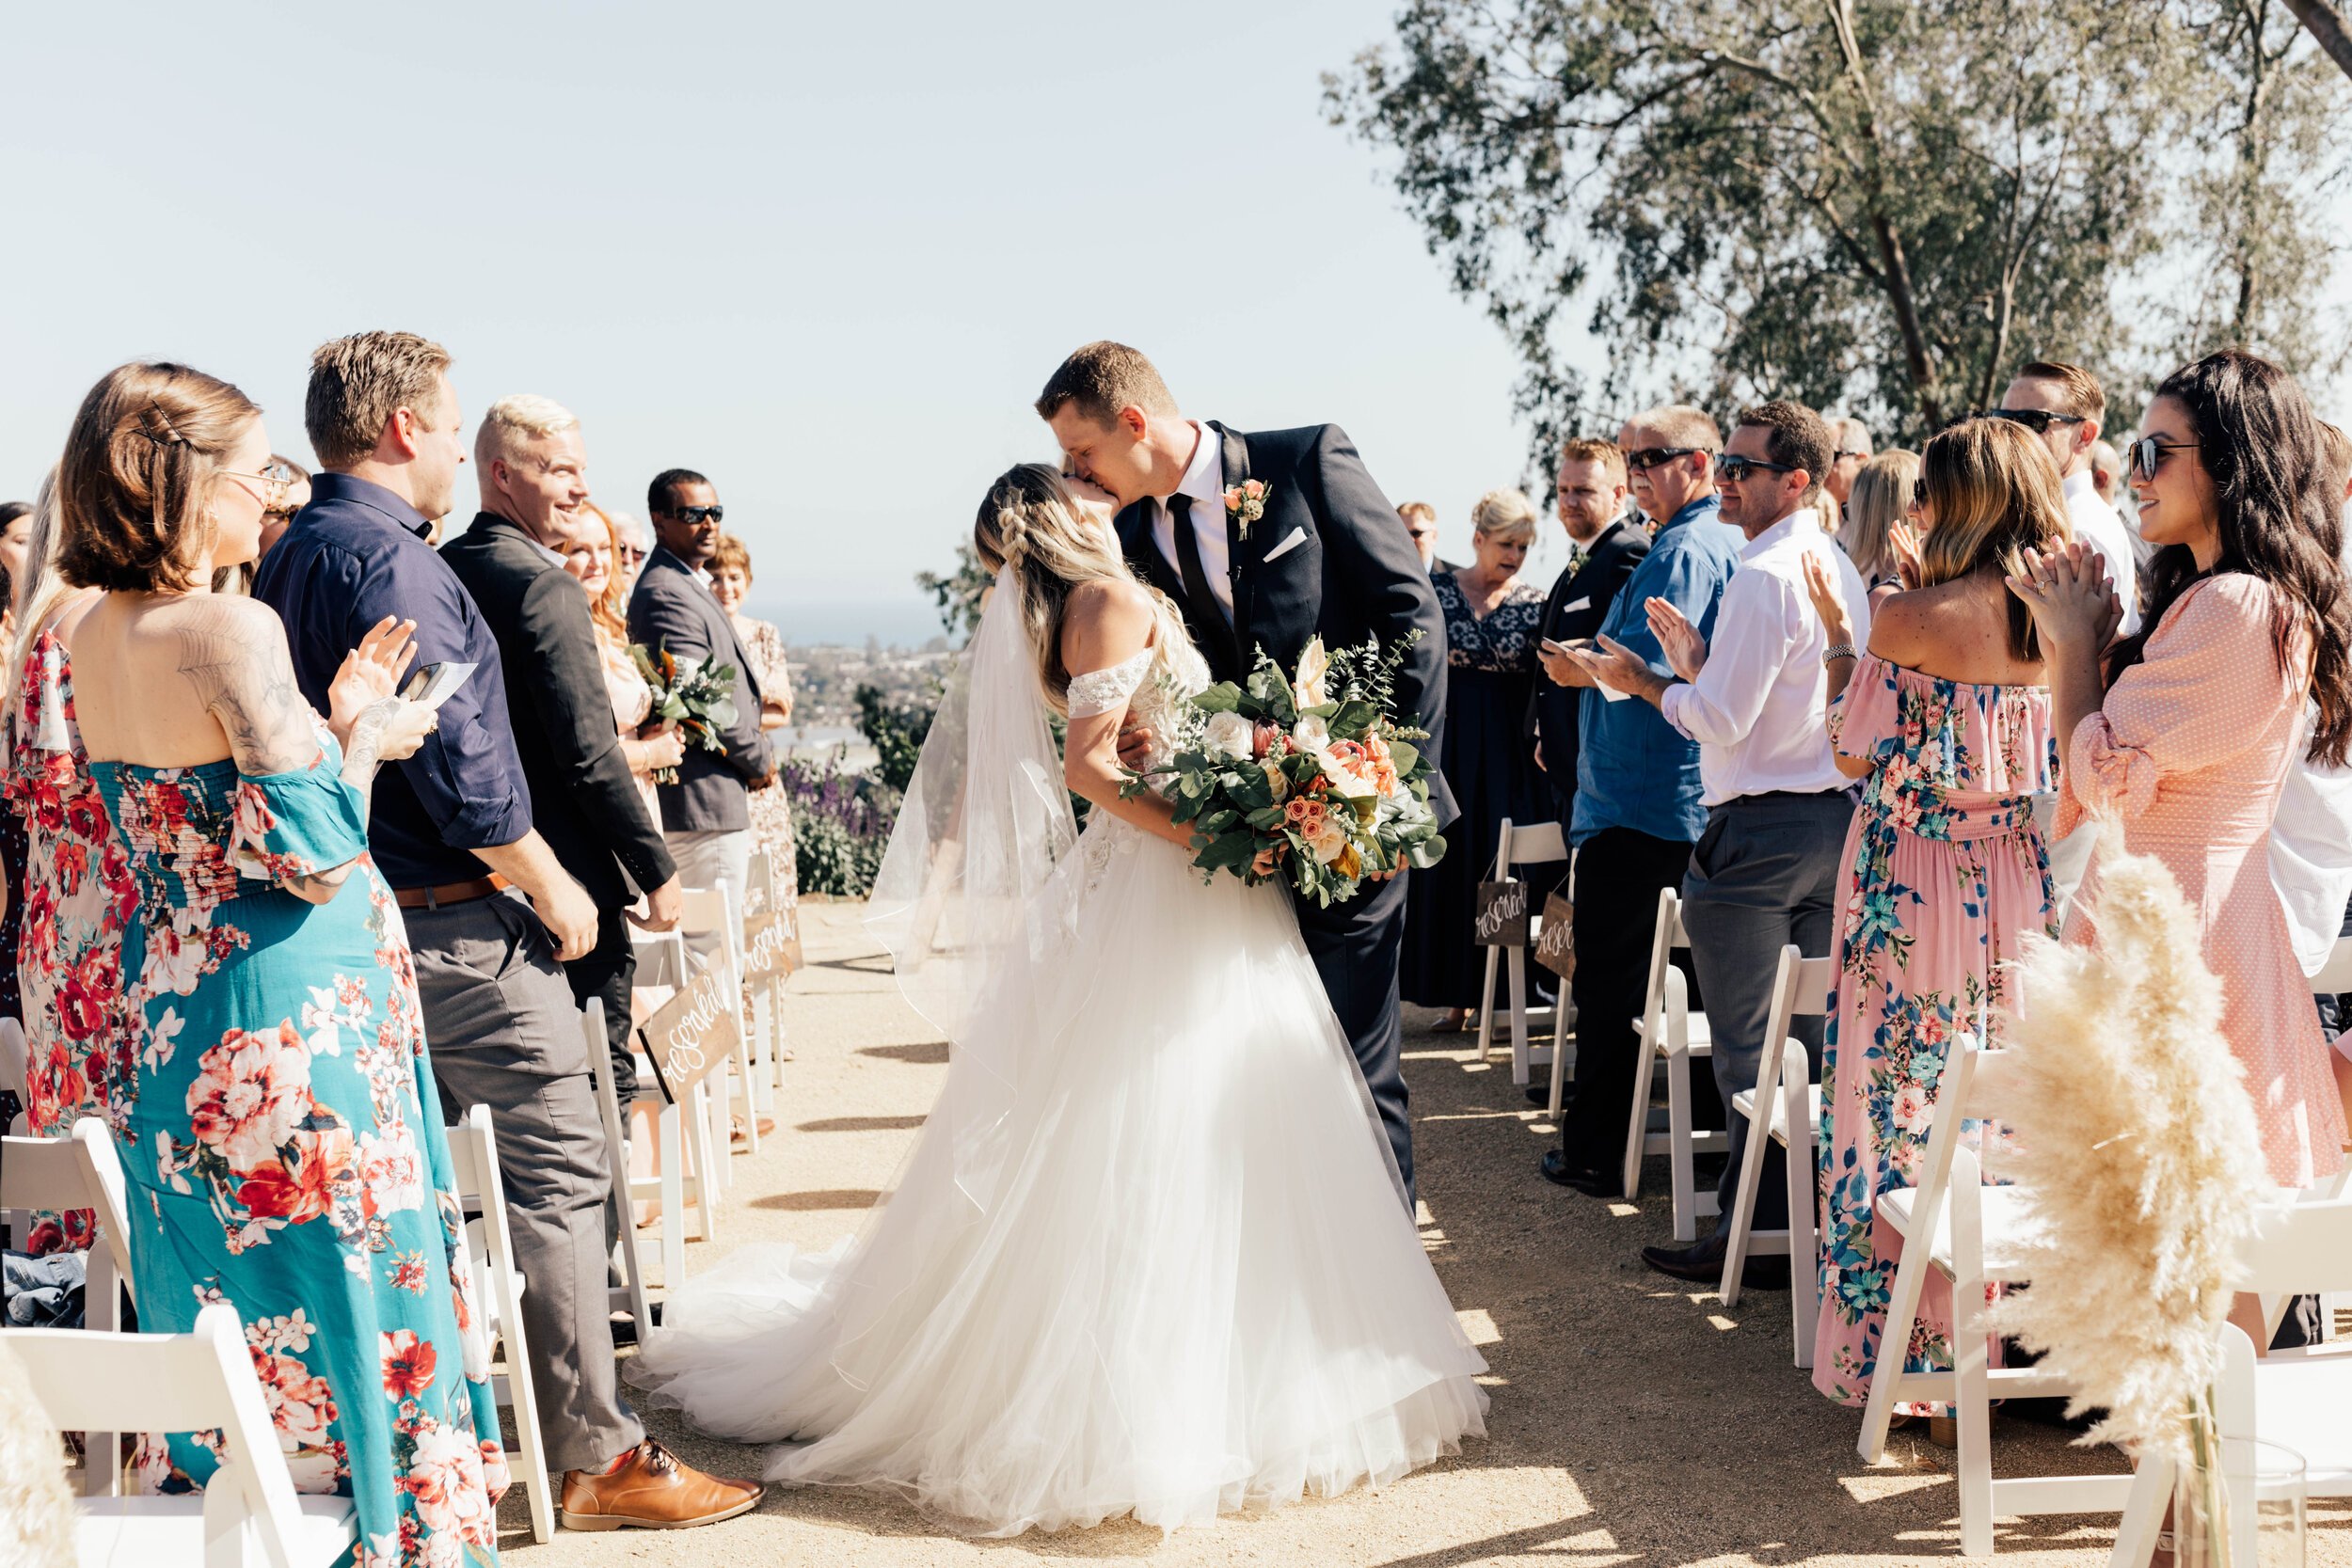 www.santabarbarawedding.com | Bria Peterson | Ocean View Farm | KB Events | Tangled Lotus | Nicquel | Amigo Party Rentals | Bride and Groom’s First Kiss at the Ceremony